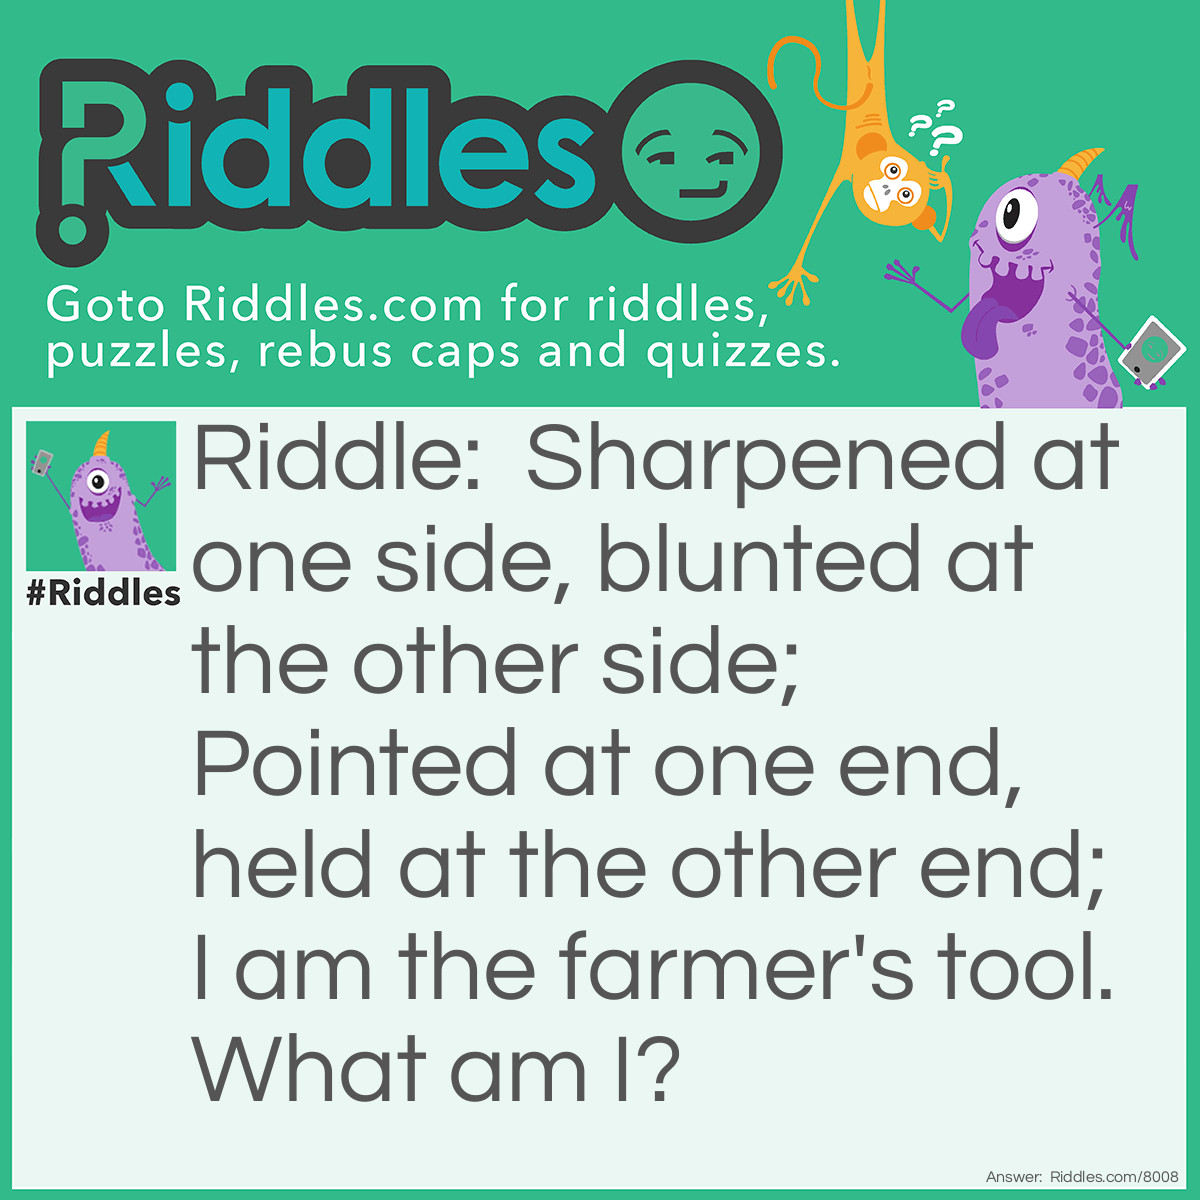 Riddle: Sharpened at one side, blunted at the other side; Pointed at one end, held at the other end; I am the farmer's tool. What am I? Answer: Machete.